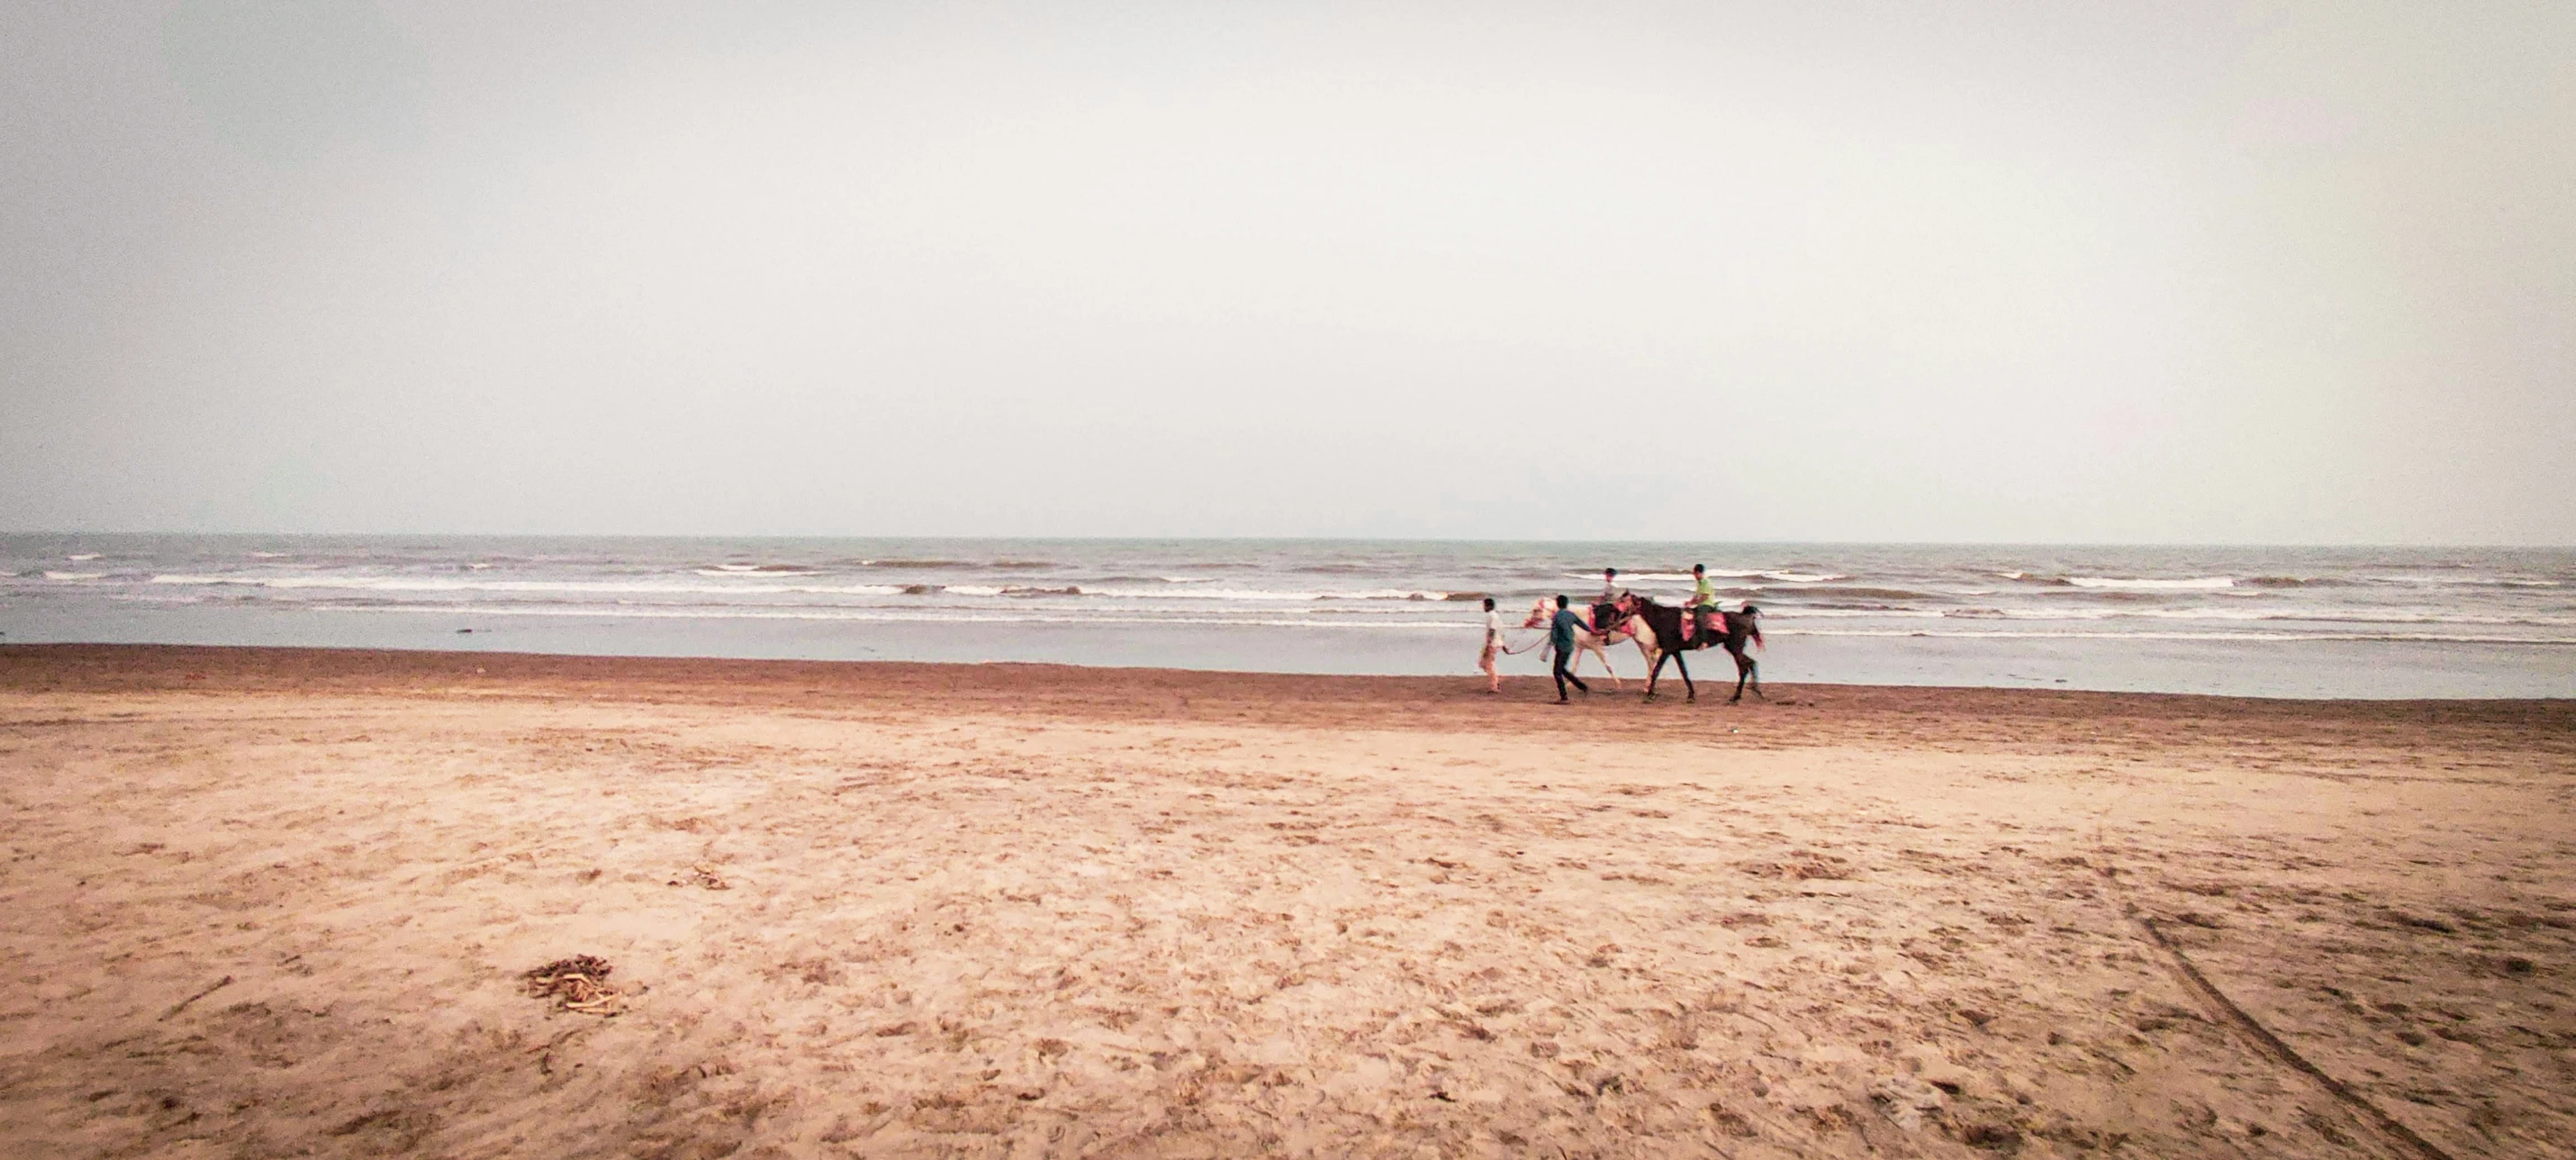 two people and some horses on the beach